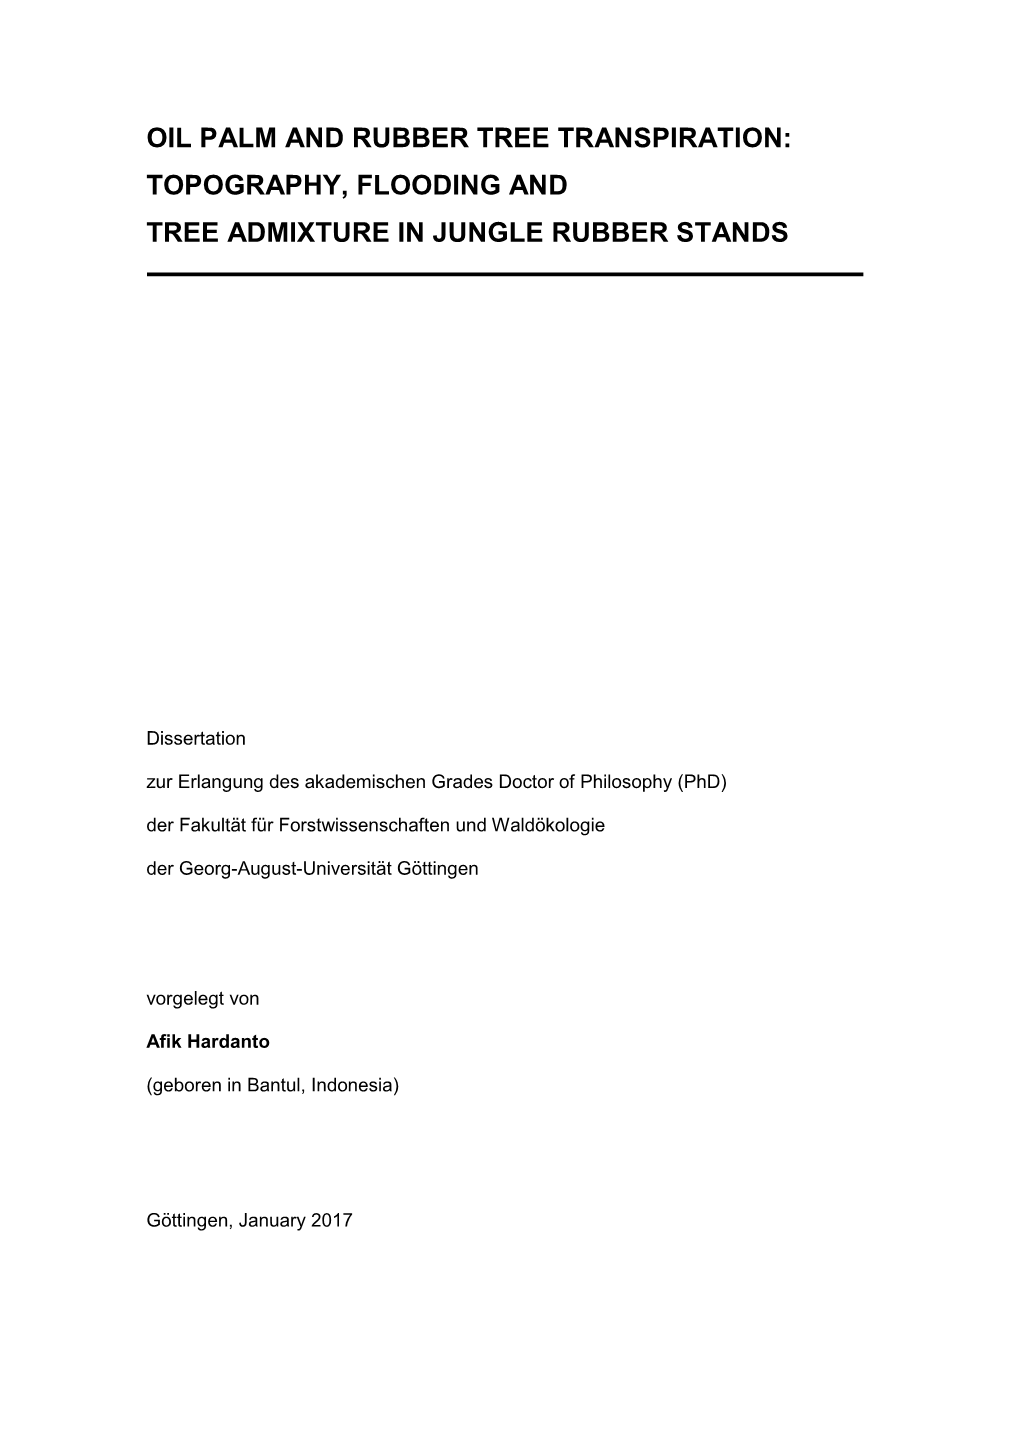 Oil Palm and Rubber Tree Transpiration: Topography, Flooding and Tree Admixture in Jungle Rubber Stands